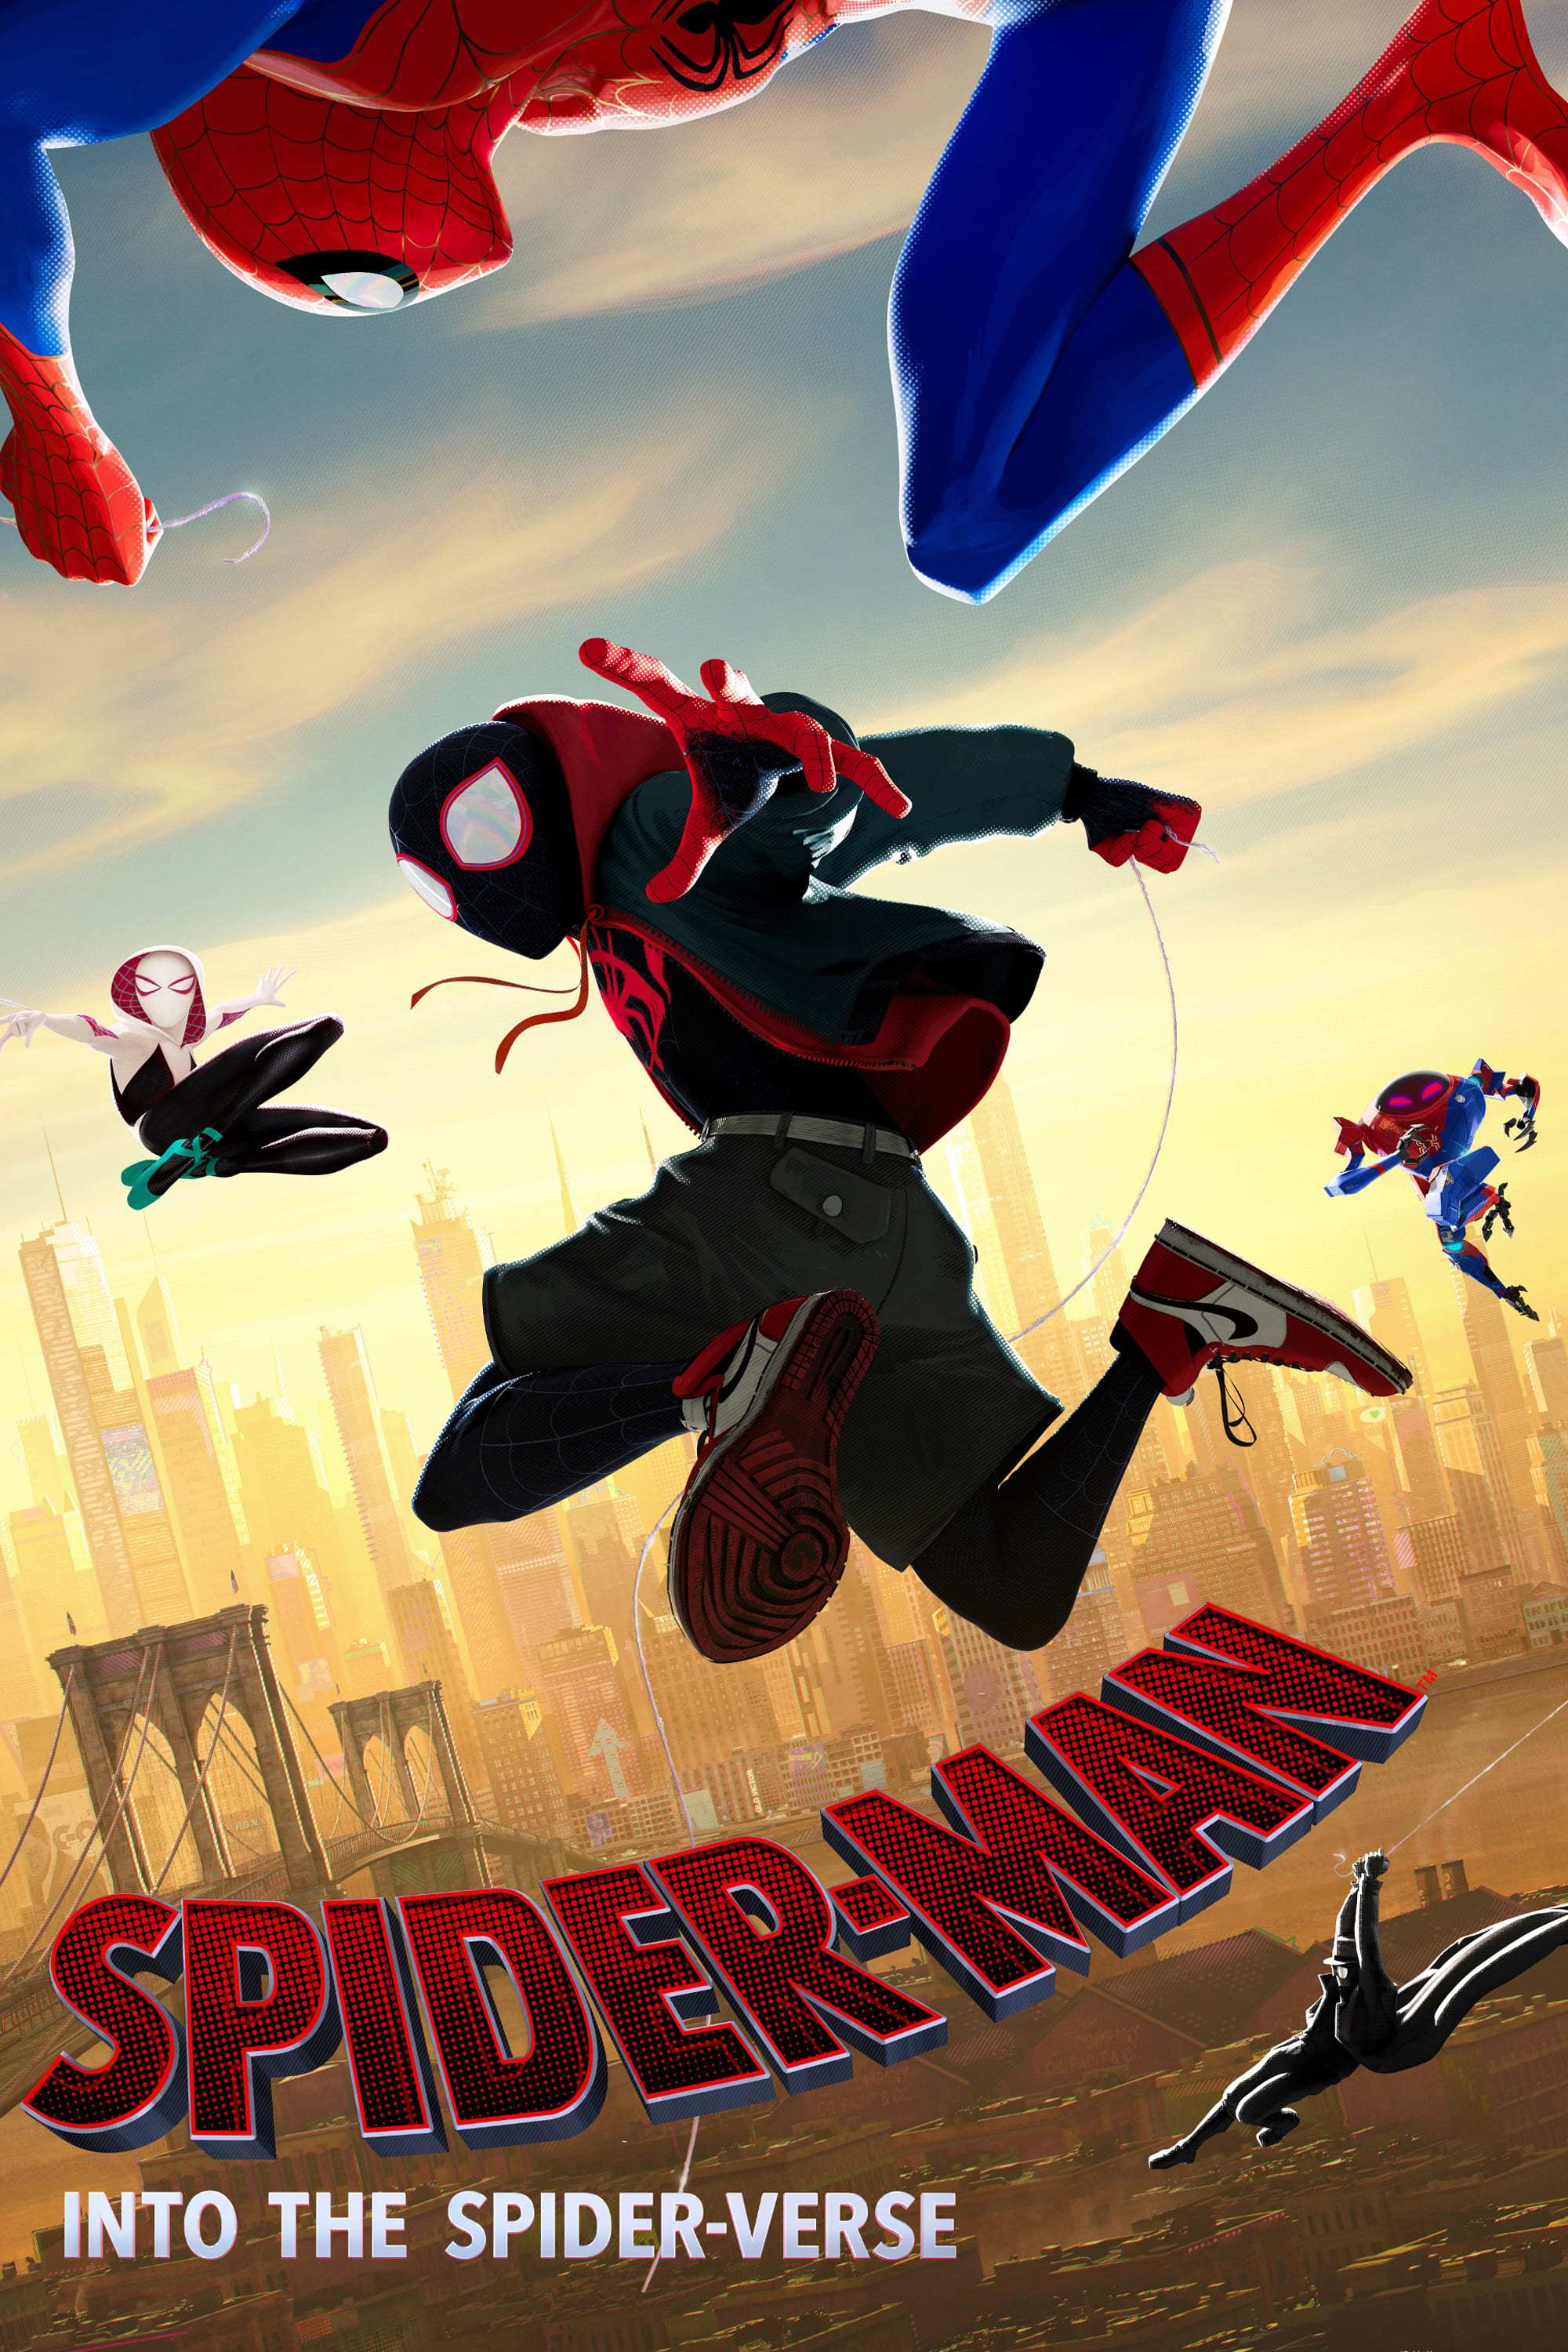 Poster for the movie "Spider-Man: Into the Spider-Verse"